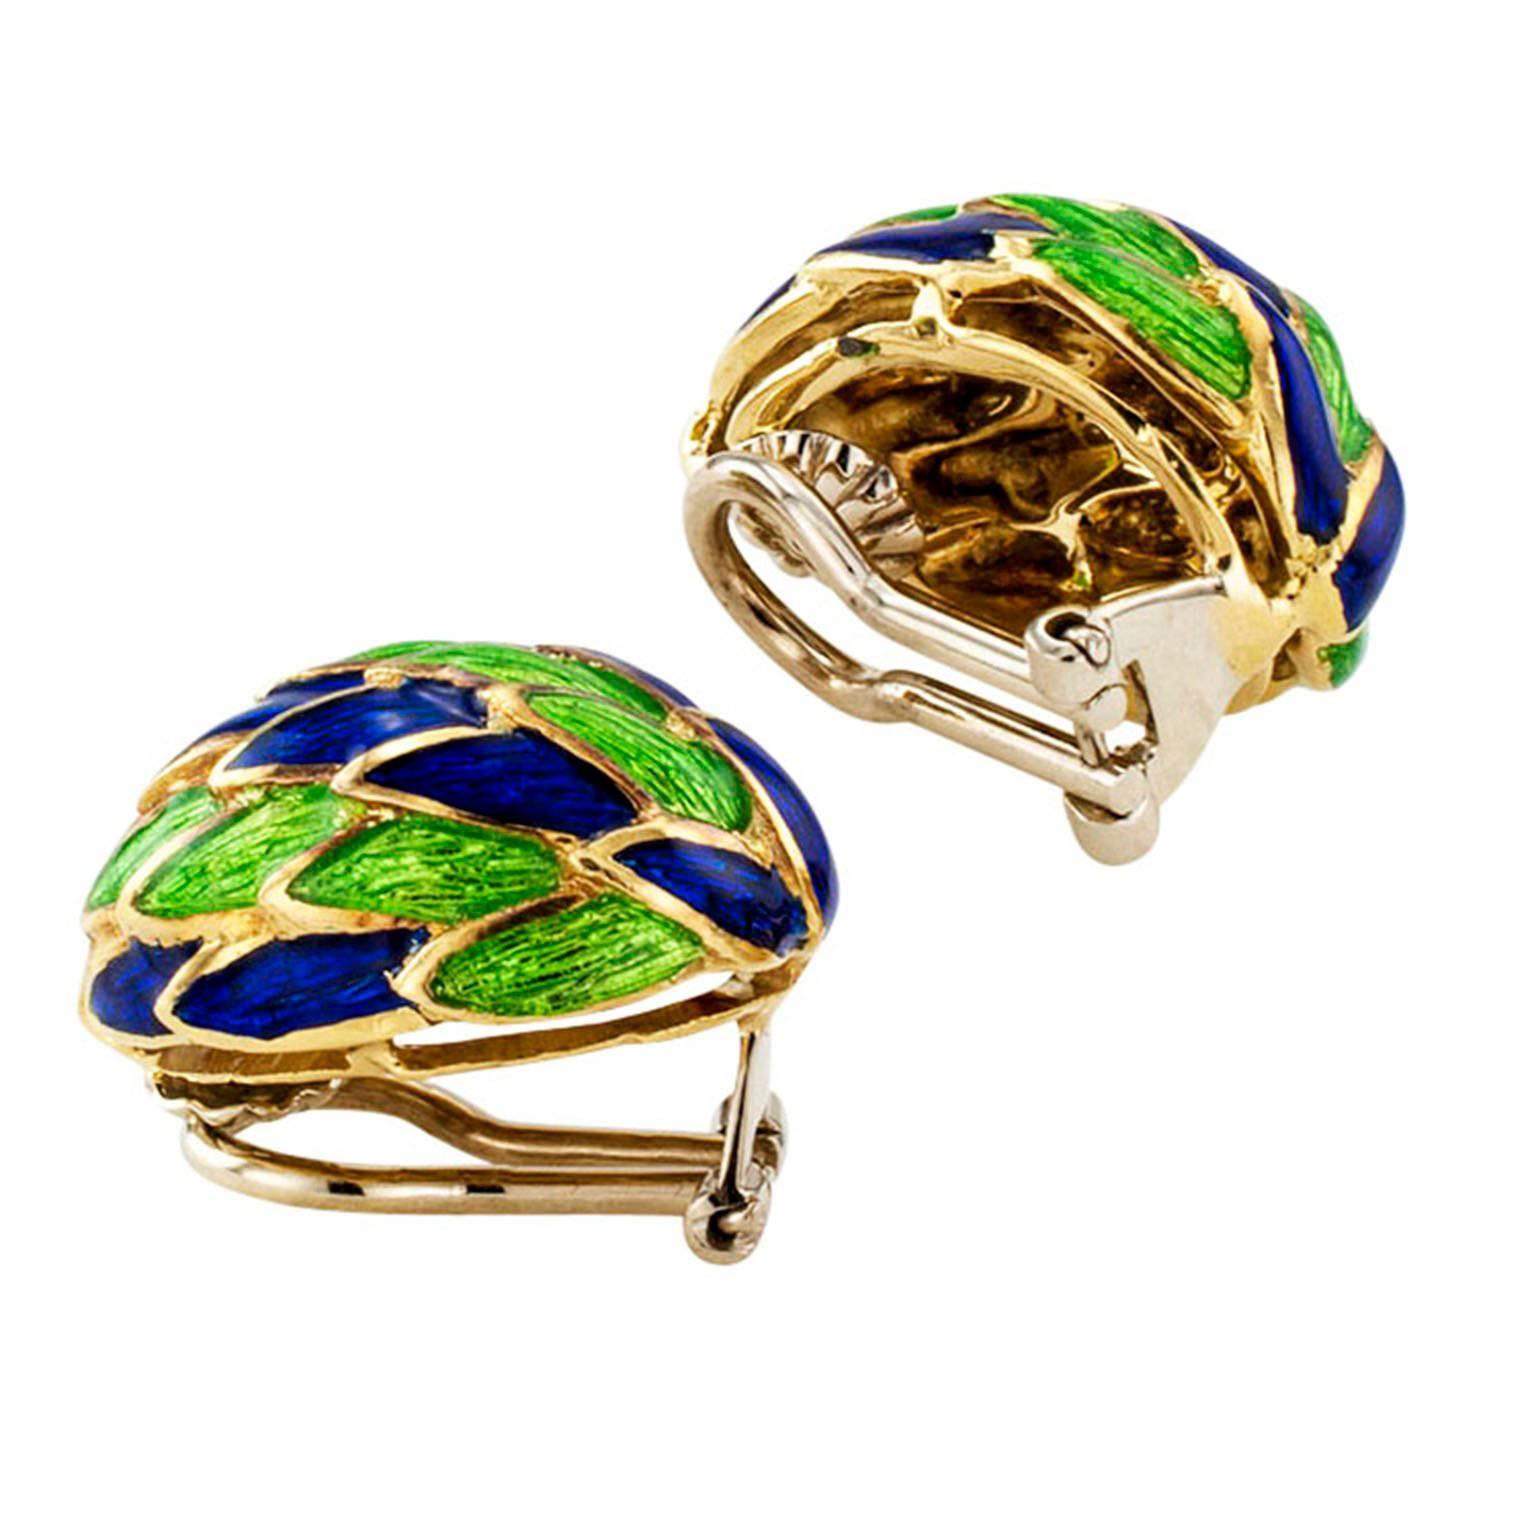 Blue and Green Enamel  Earrings Circa 1970

A whimsical play between colors and patterns give these conical shaped ear clips a most distinctive look.  Classic blue and green, both neutral and easy to coordinate with other colors in the wardrobe to